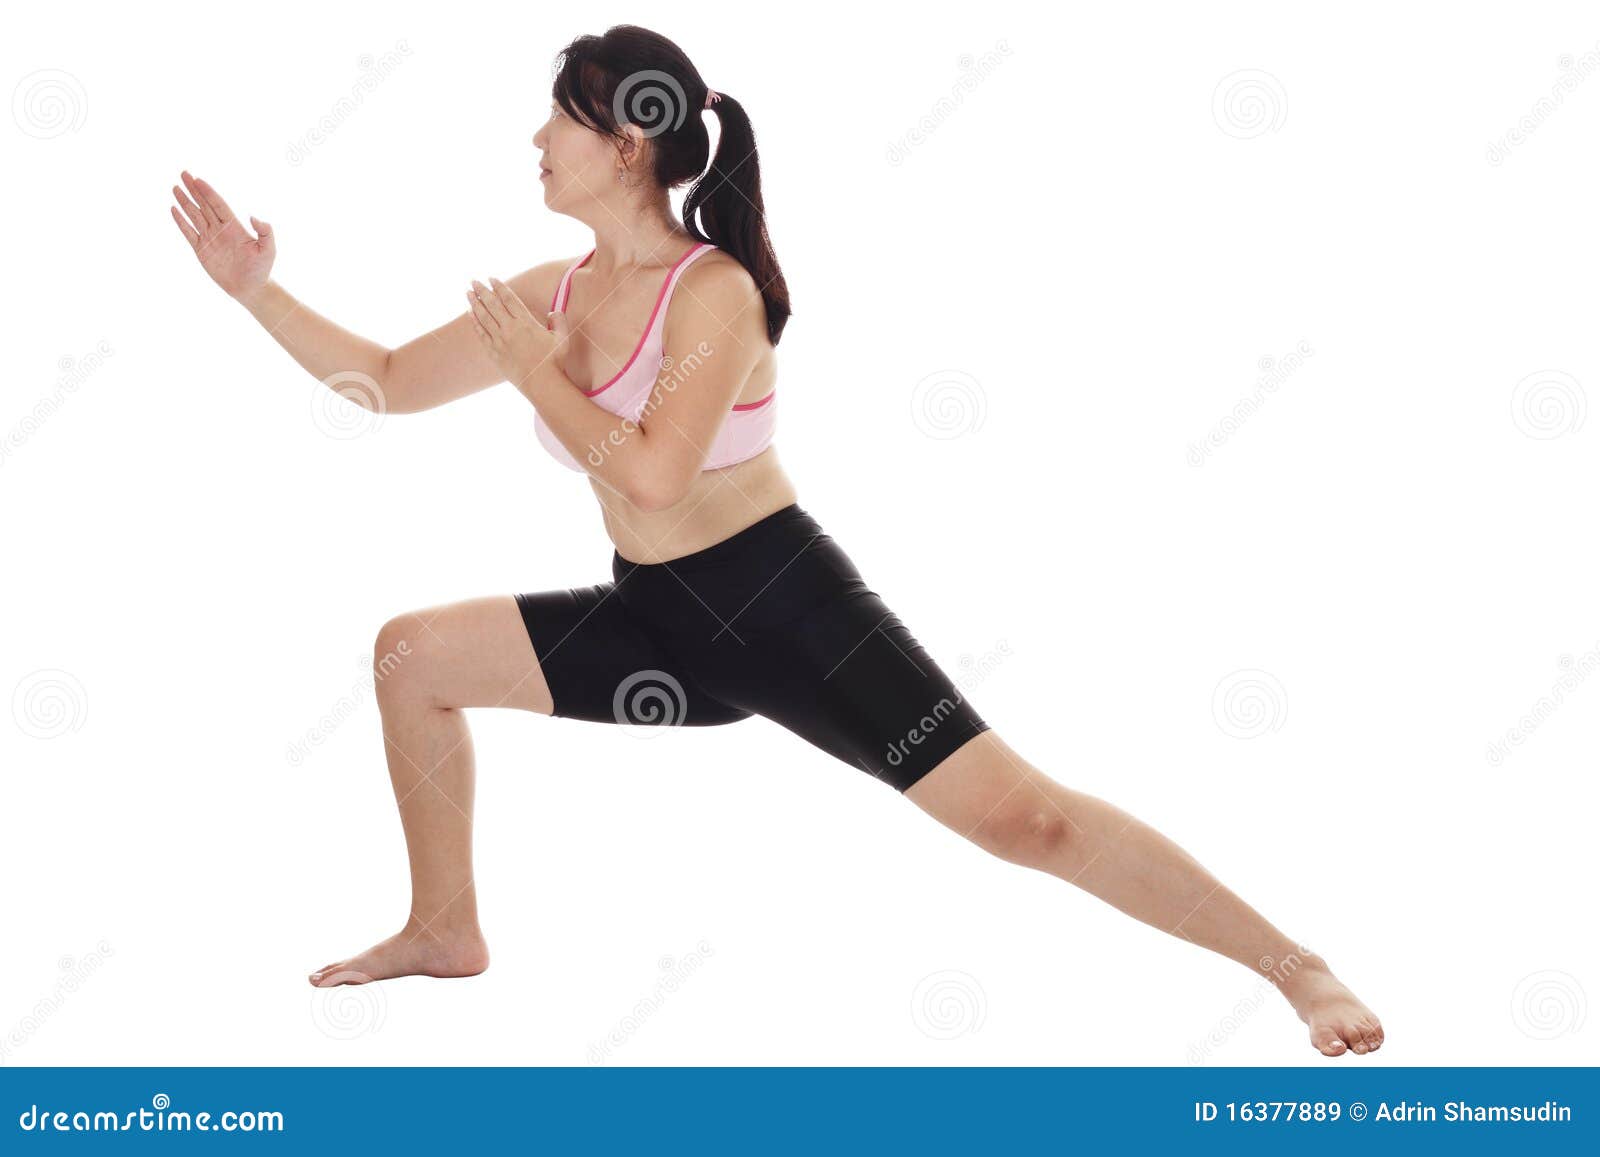 Naked Karate Action Poses Photos 55